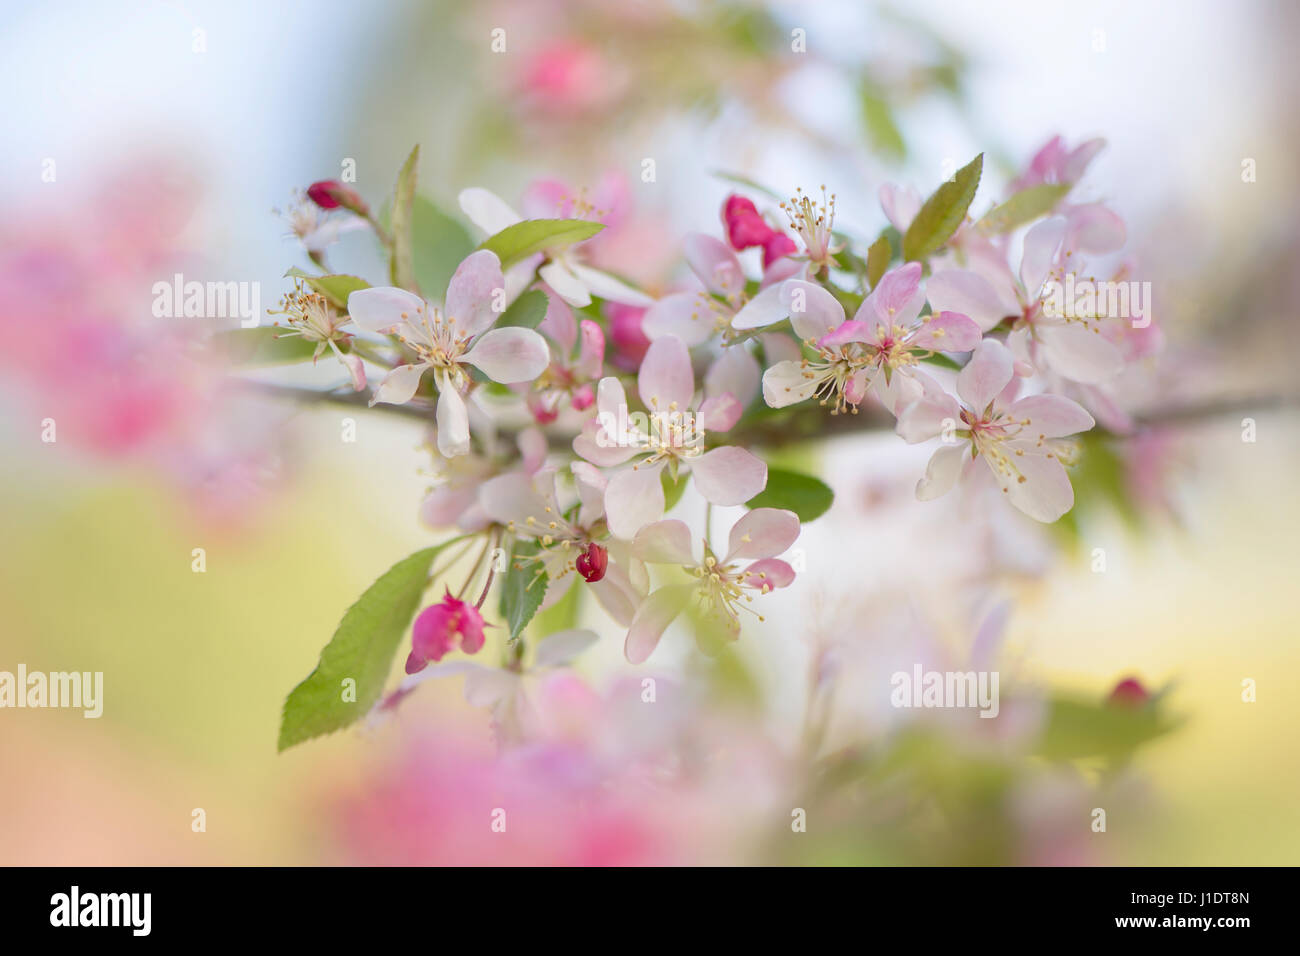 Close-up image of the pretty spring blossom pink and white flowers of the Japanese Crab apple tree - Malus floribunda Stock Photo